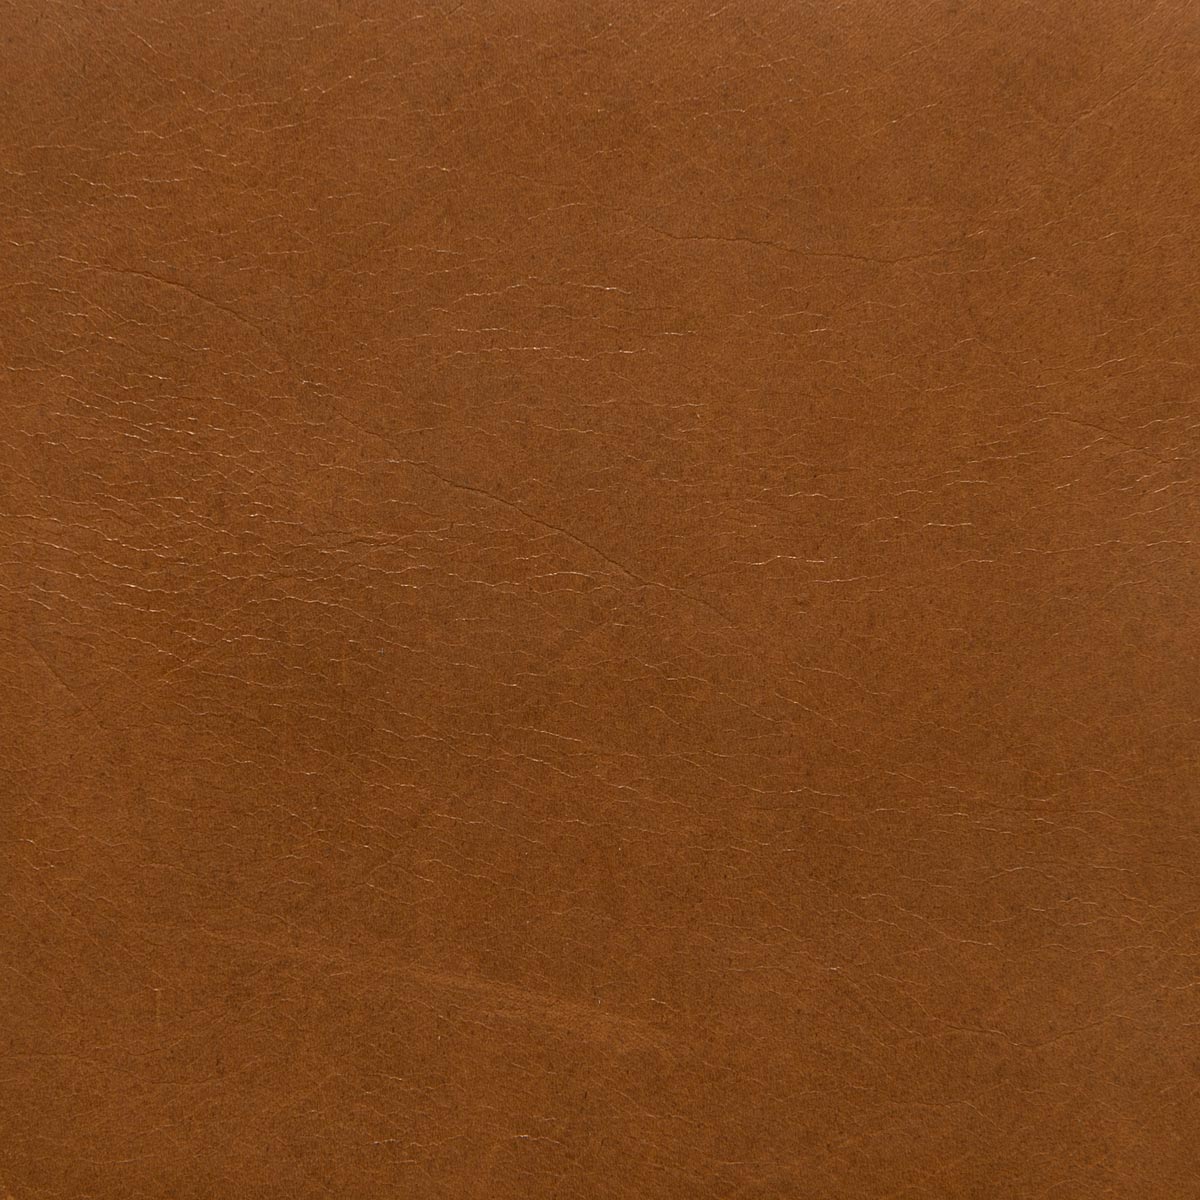 Metro - Two-Toned Effect Textured Leather - Jamie Stern Design